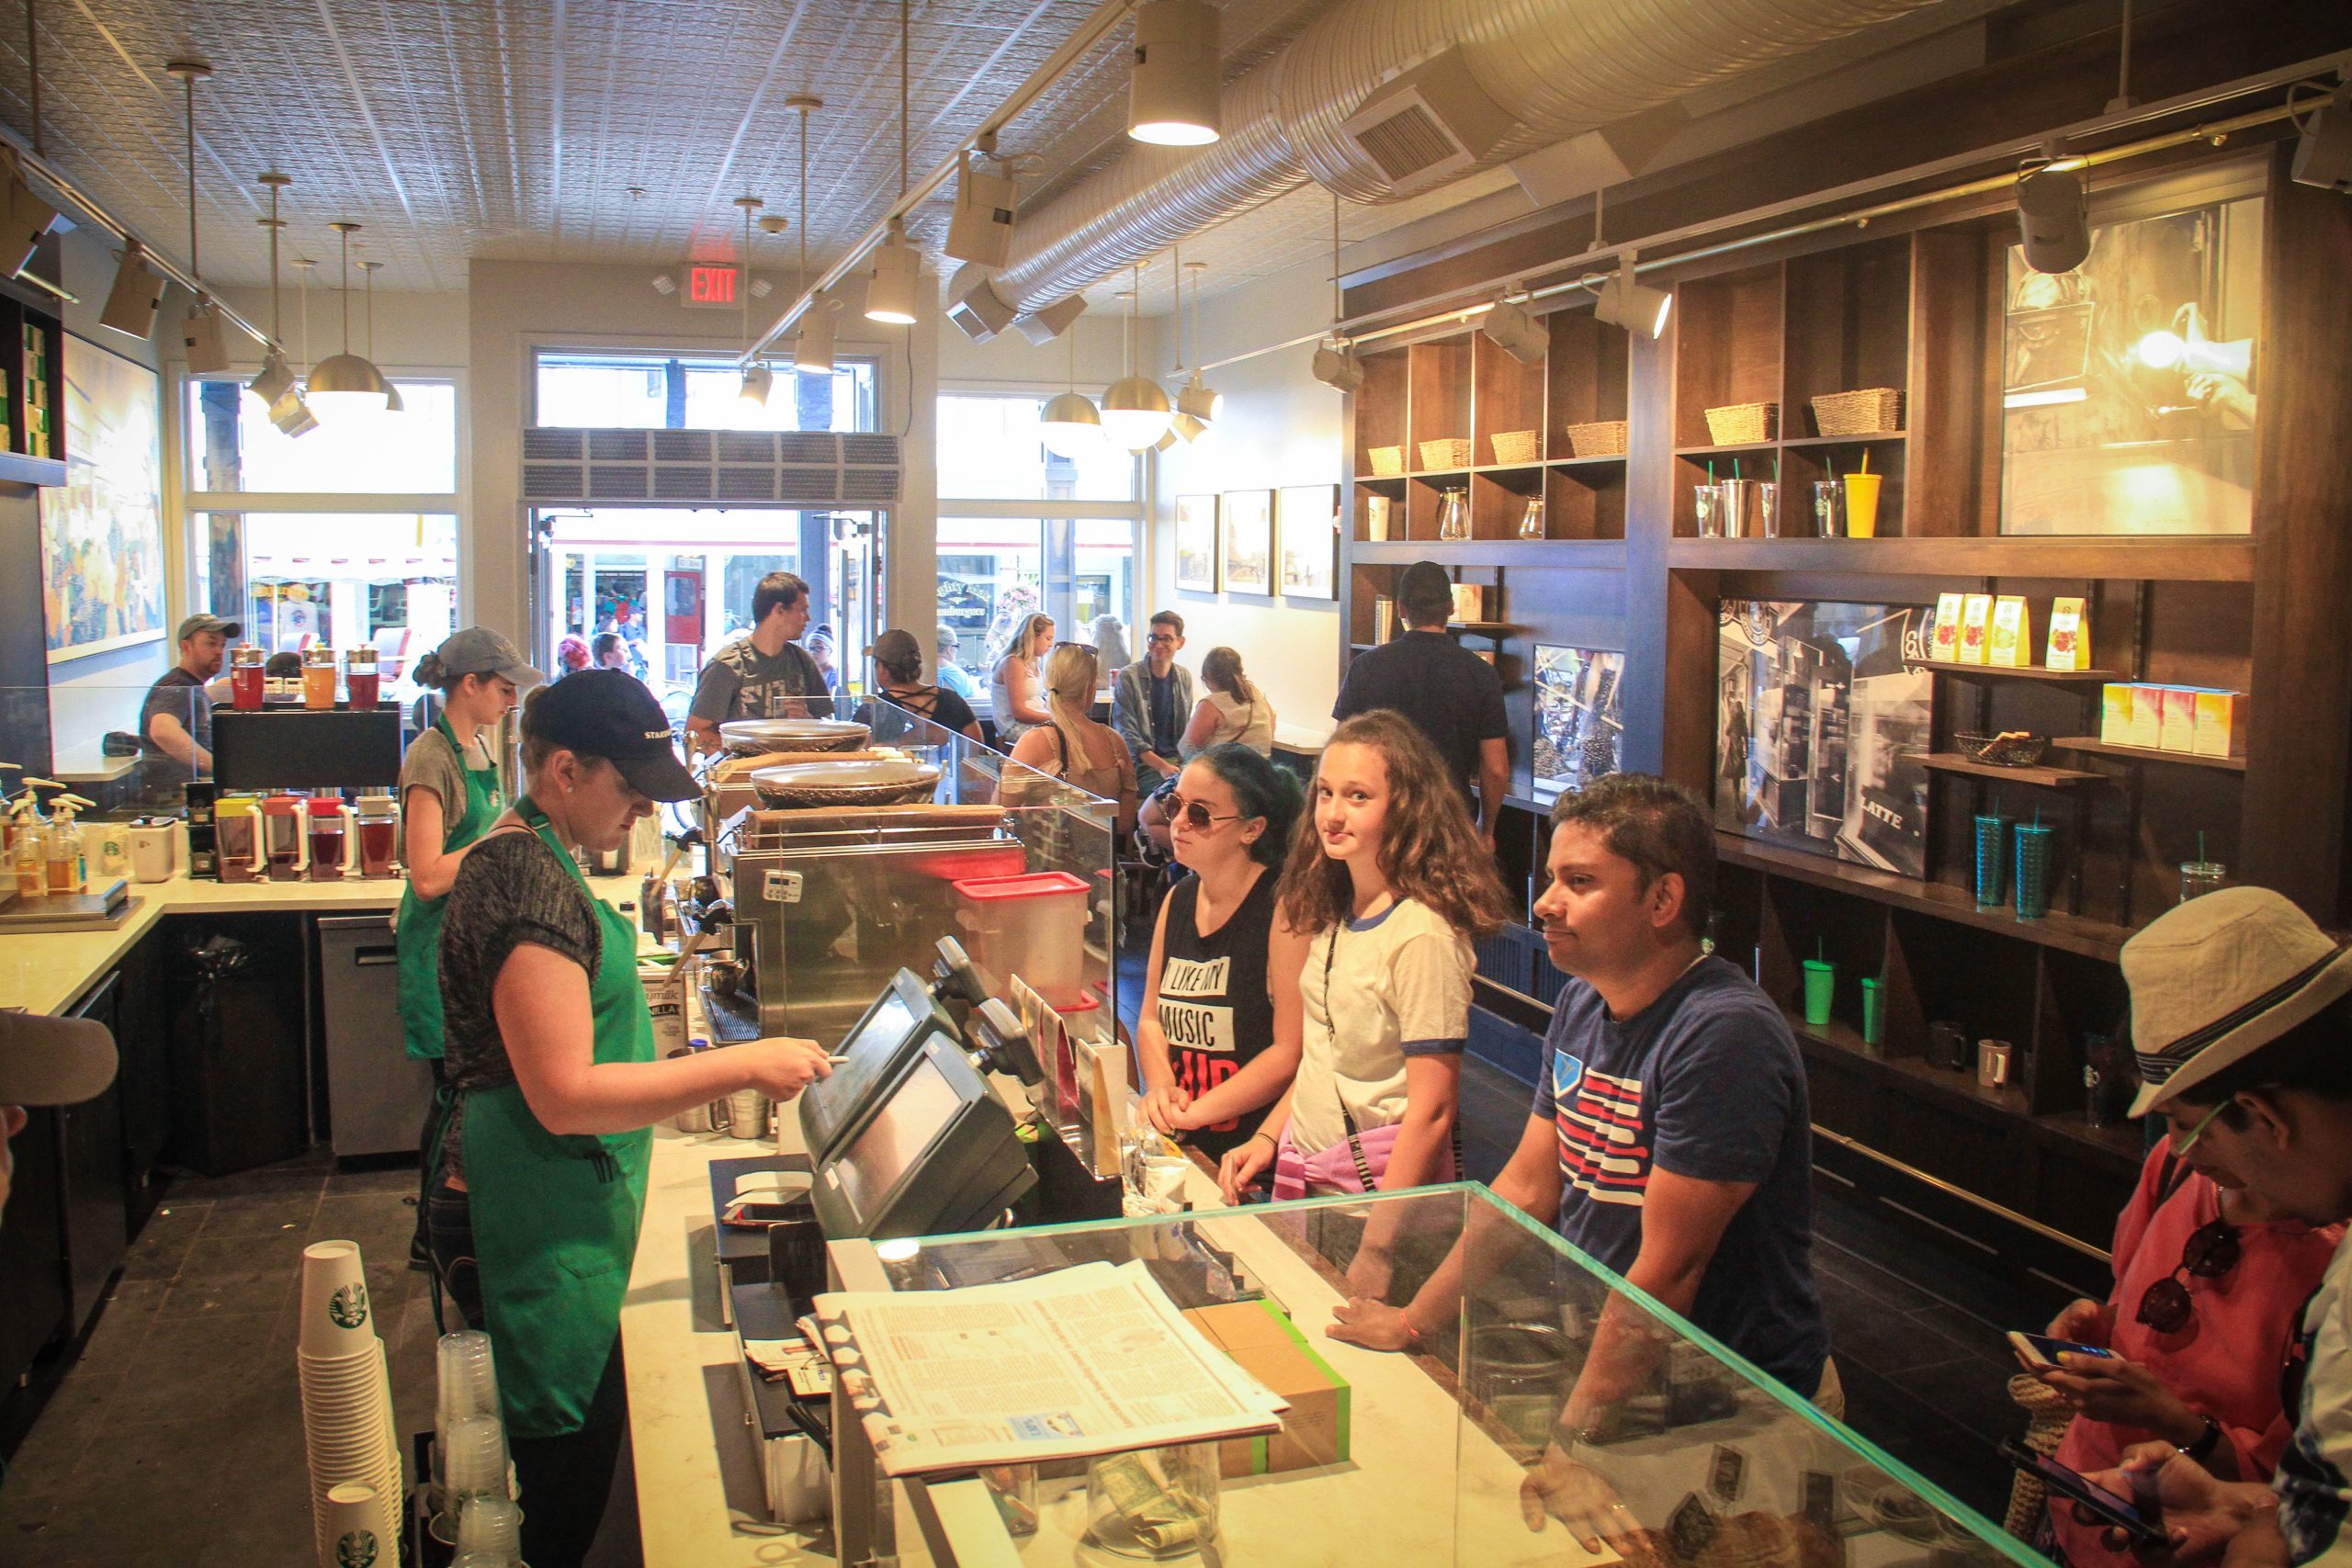 A barista takes orders from guests at the Starbucks on Mackinac Island